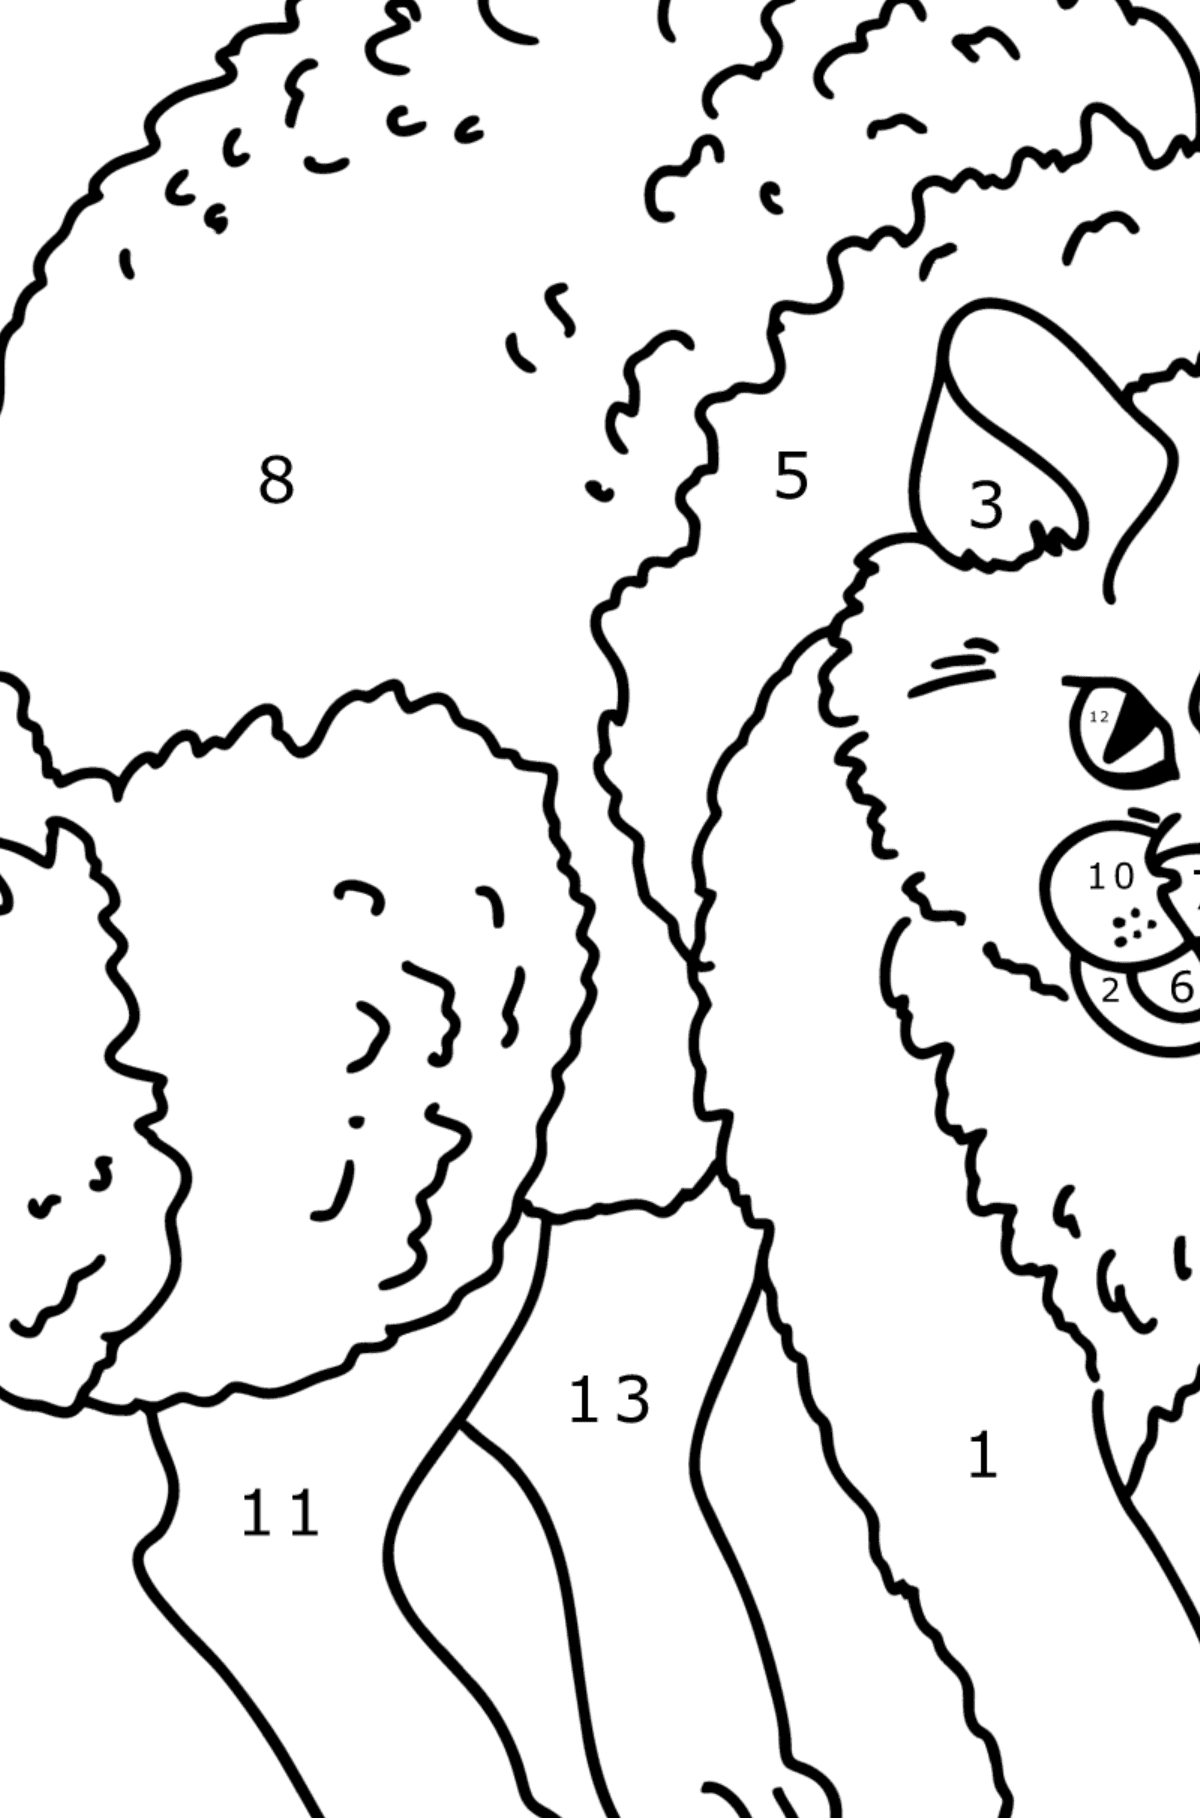 Grumpy Cat coloring page - Coloring by Numbers for Kids